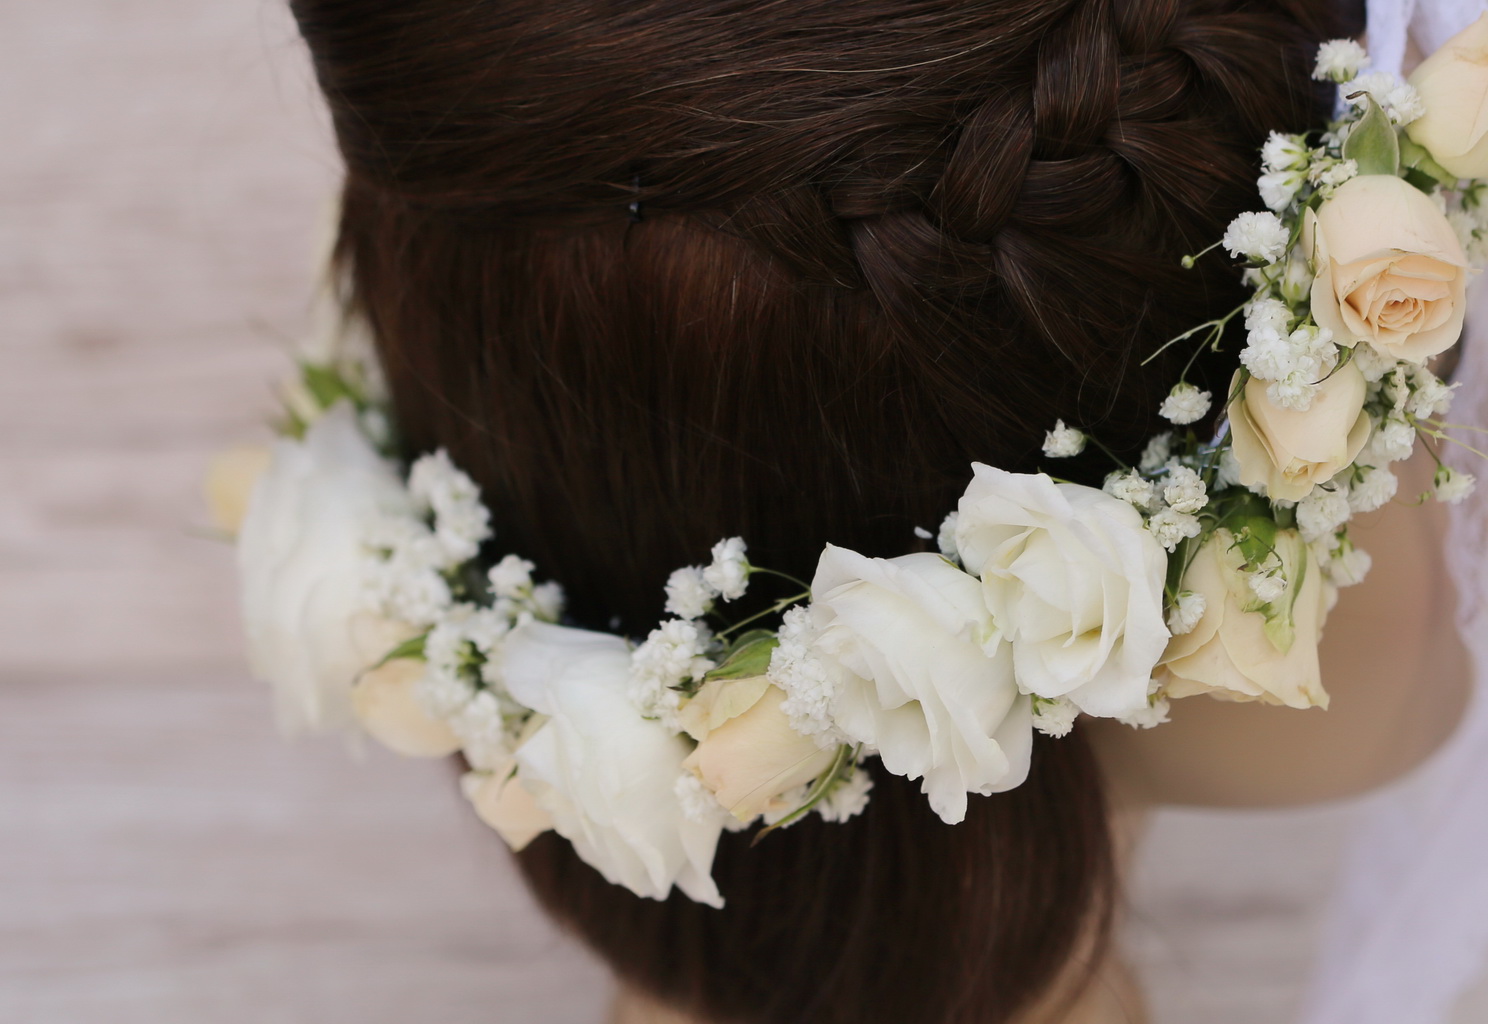 flower delivery Budapest - hair wreath (rose, lisianthus, baby's breathe, creme)